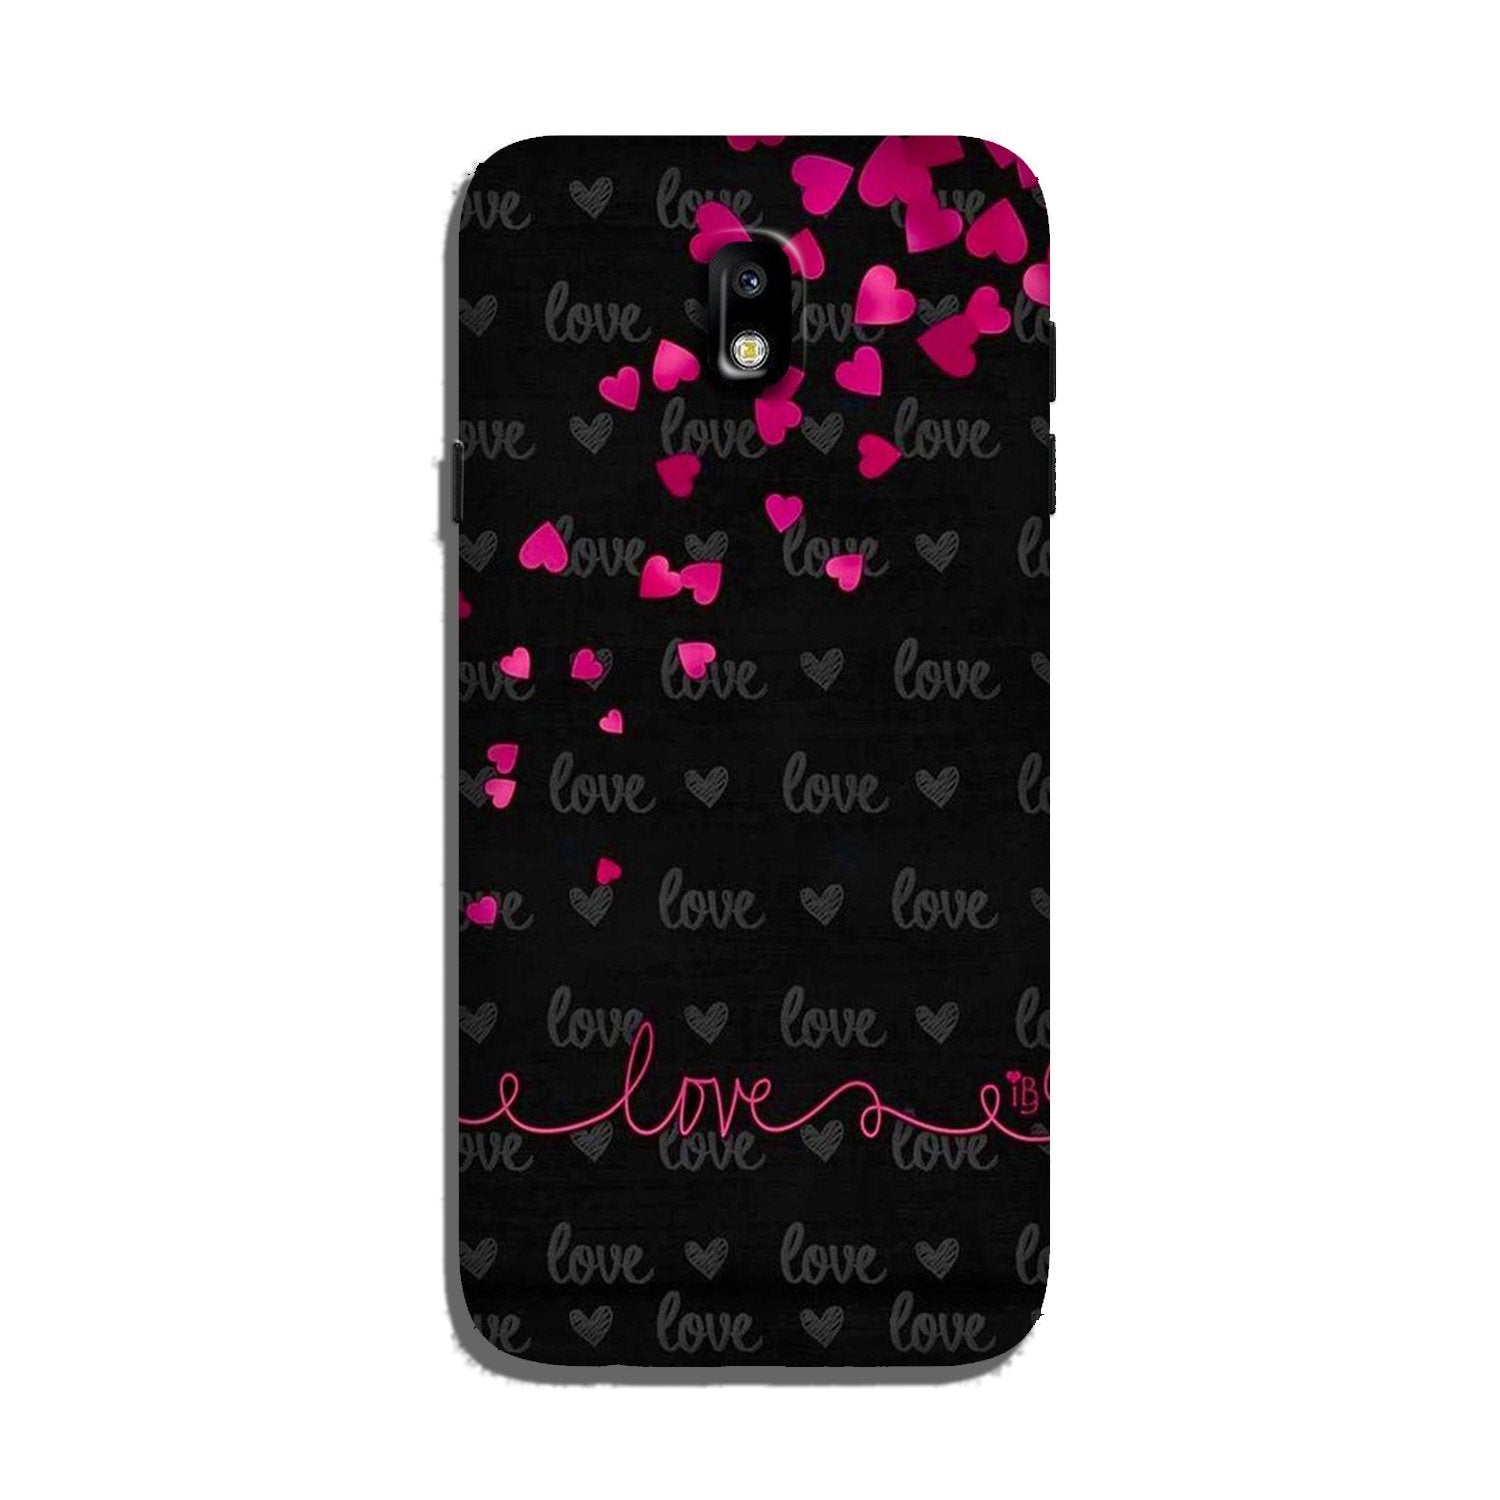 Love in Air Case for Galaxy J7 Pro